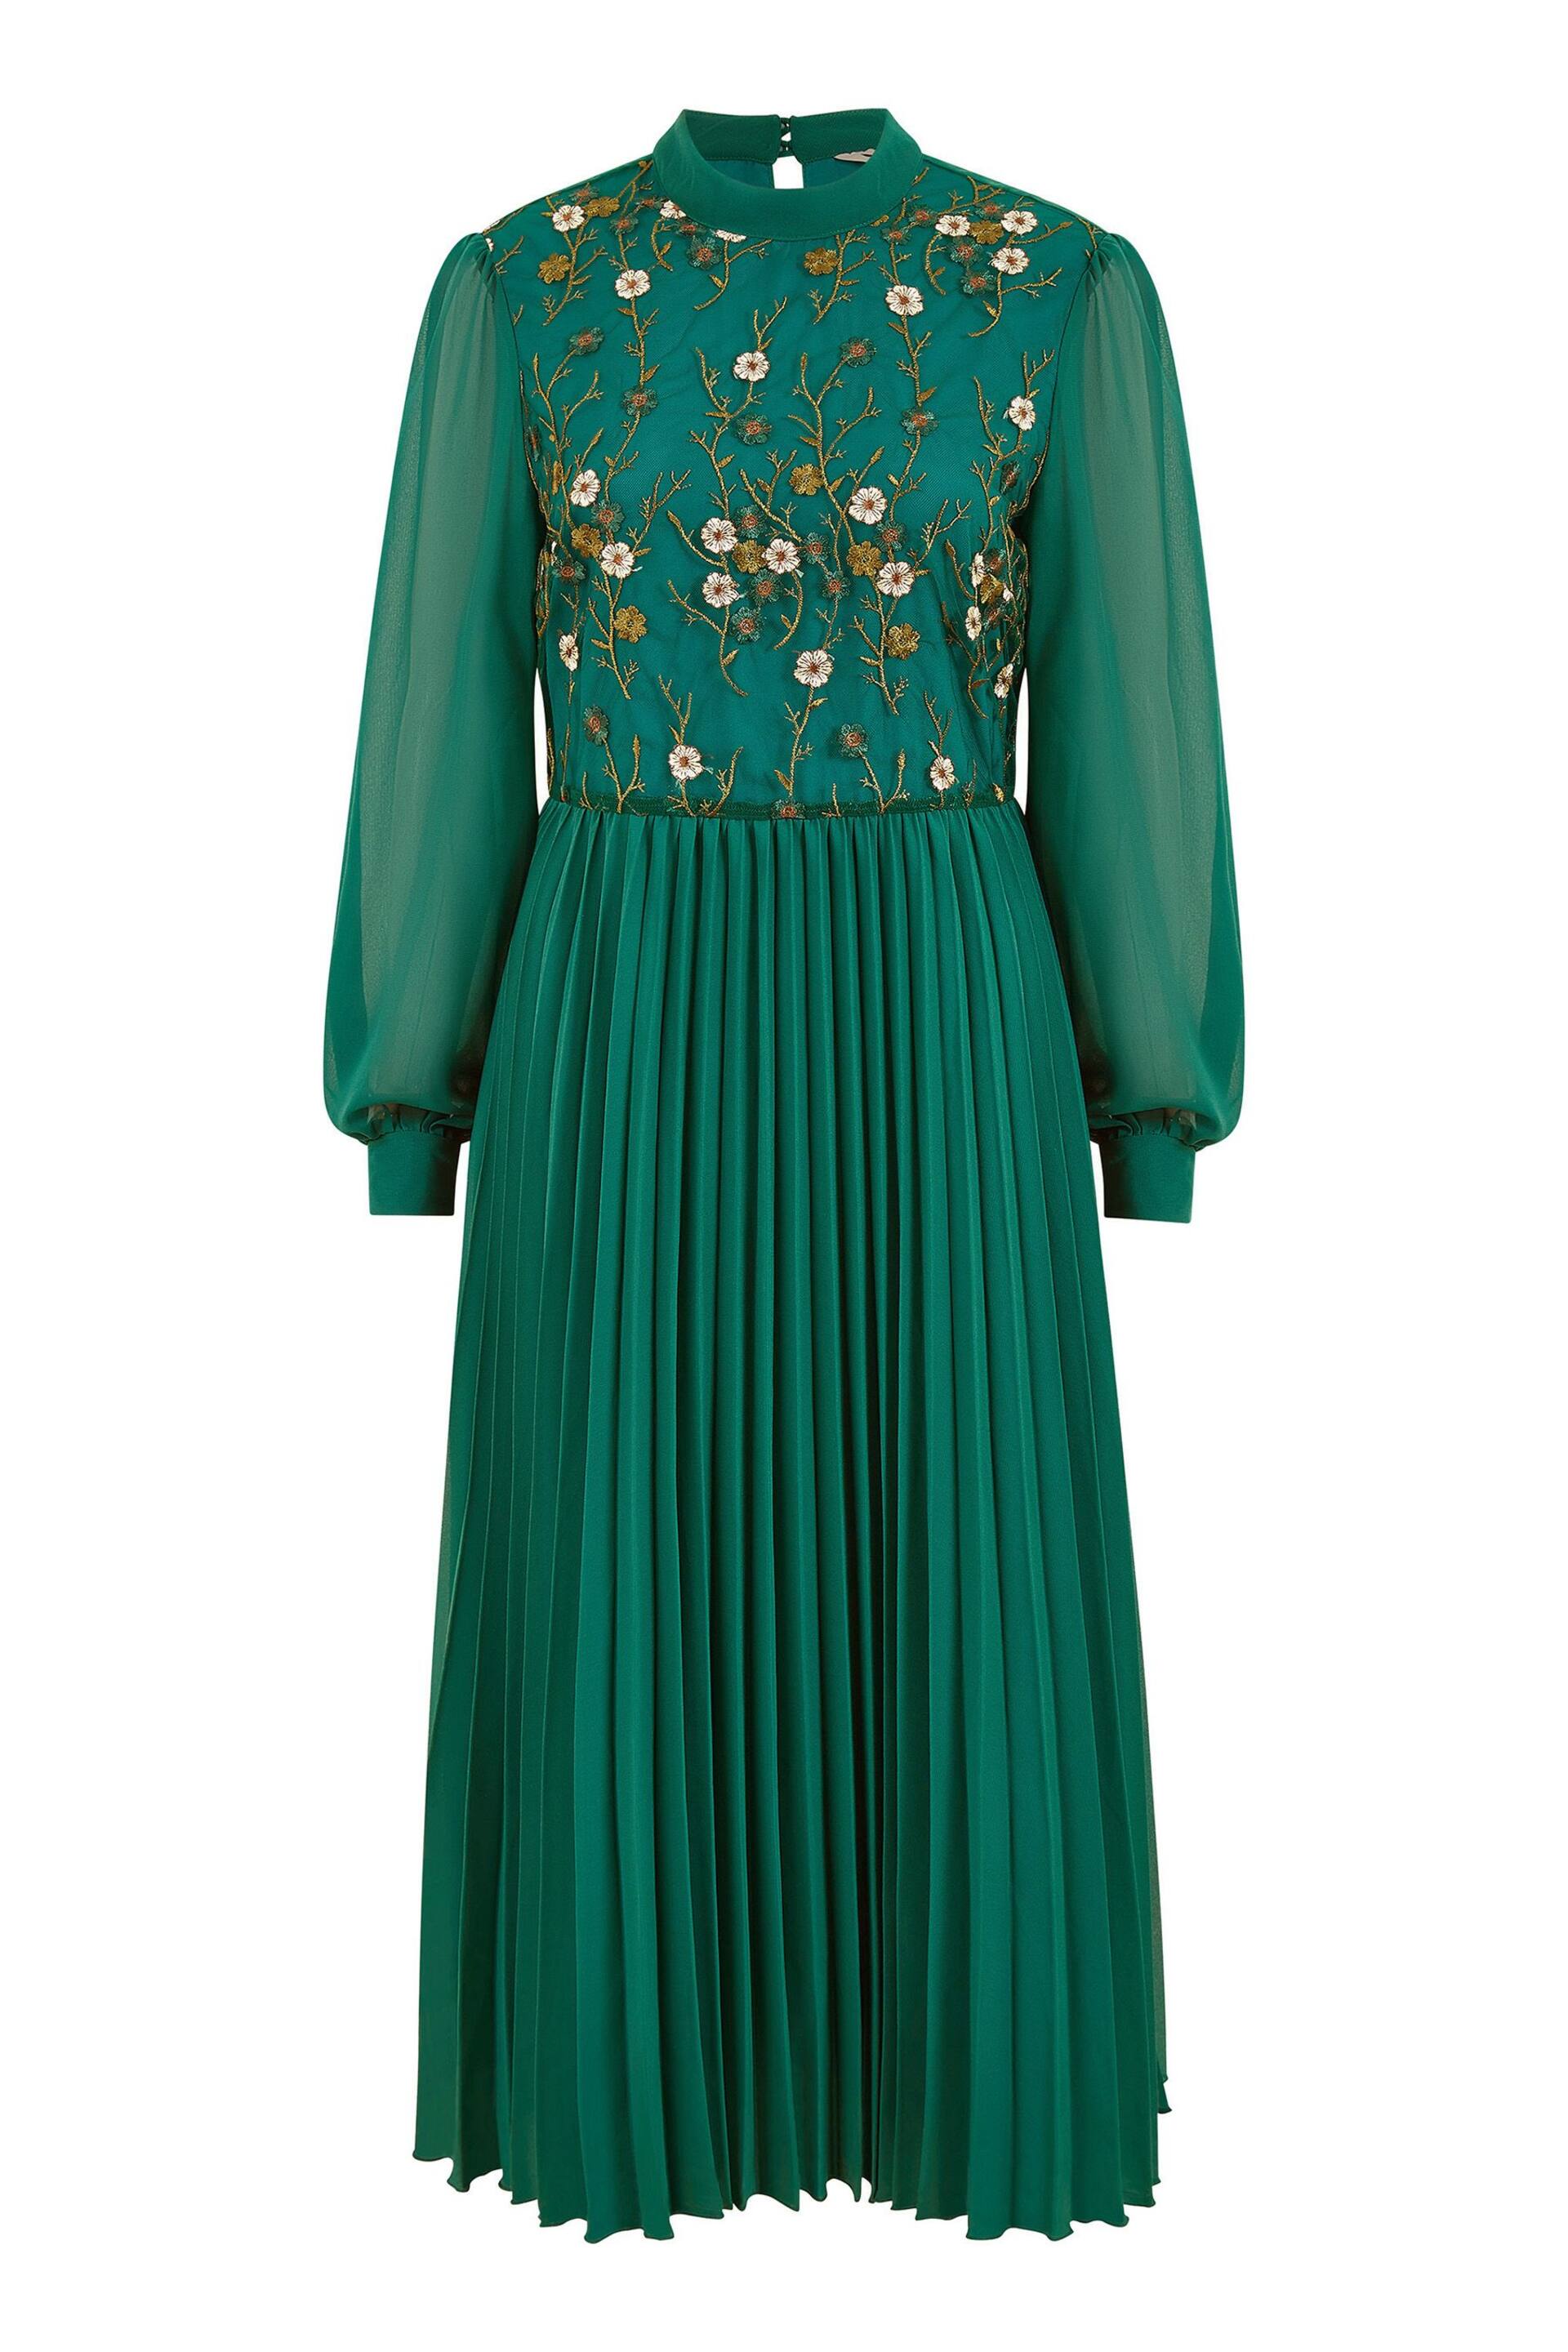 Yumi Green Embroidered Long Sleeve Pleated Midi Dress - Image 5 of 5